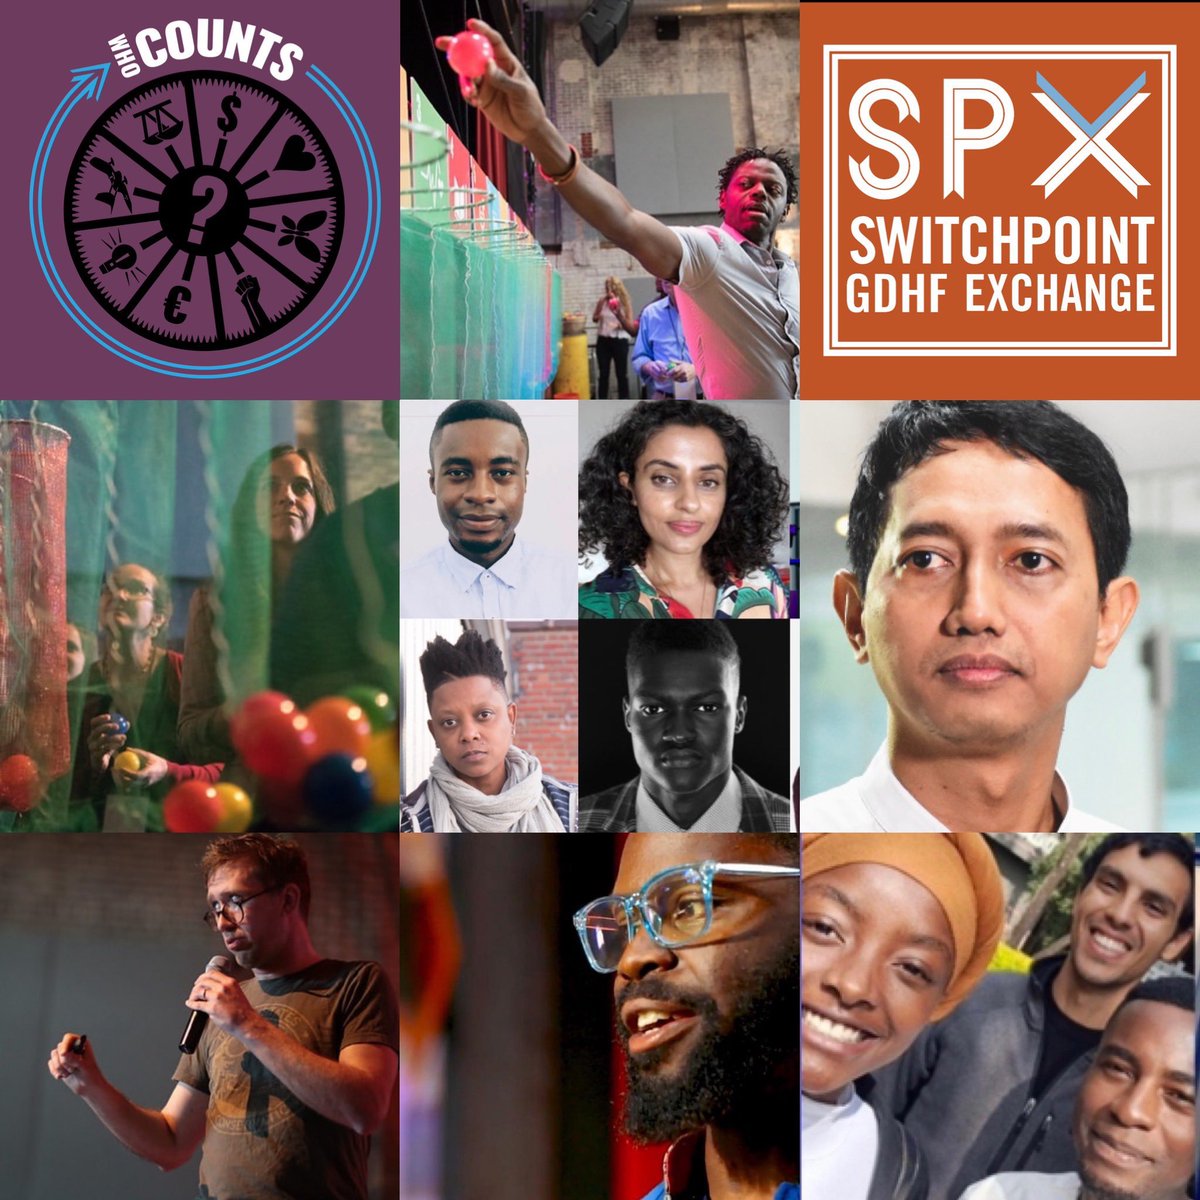 Thanks to all the speakers, performers and audience participants @SwitchPointIdea « Who Counts? » @The_GDHN #GDHF2022 Presented by @IntraHealth w #SwitchPoint #FutureLeague support from @GlobalFund! Up next #SwitchPoint at the Youth Conf at #CPHIA2022‼️➡️ event.switchpointideas.com